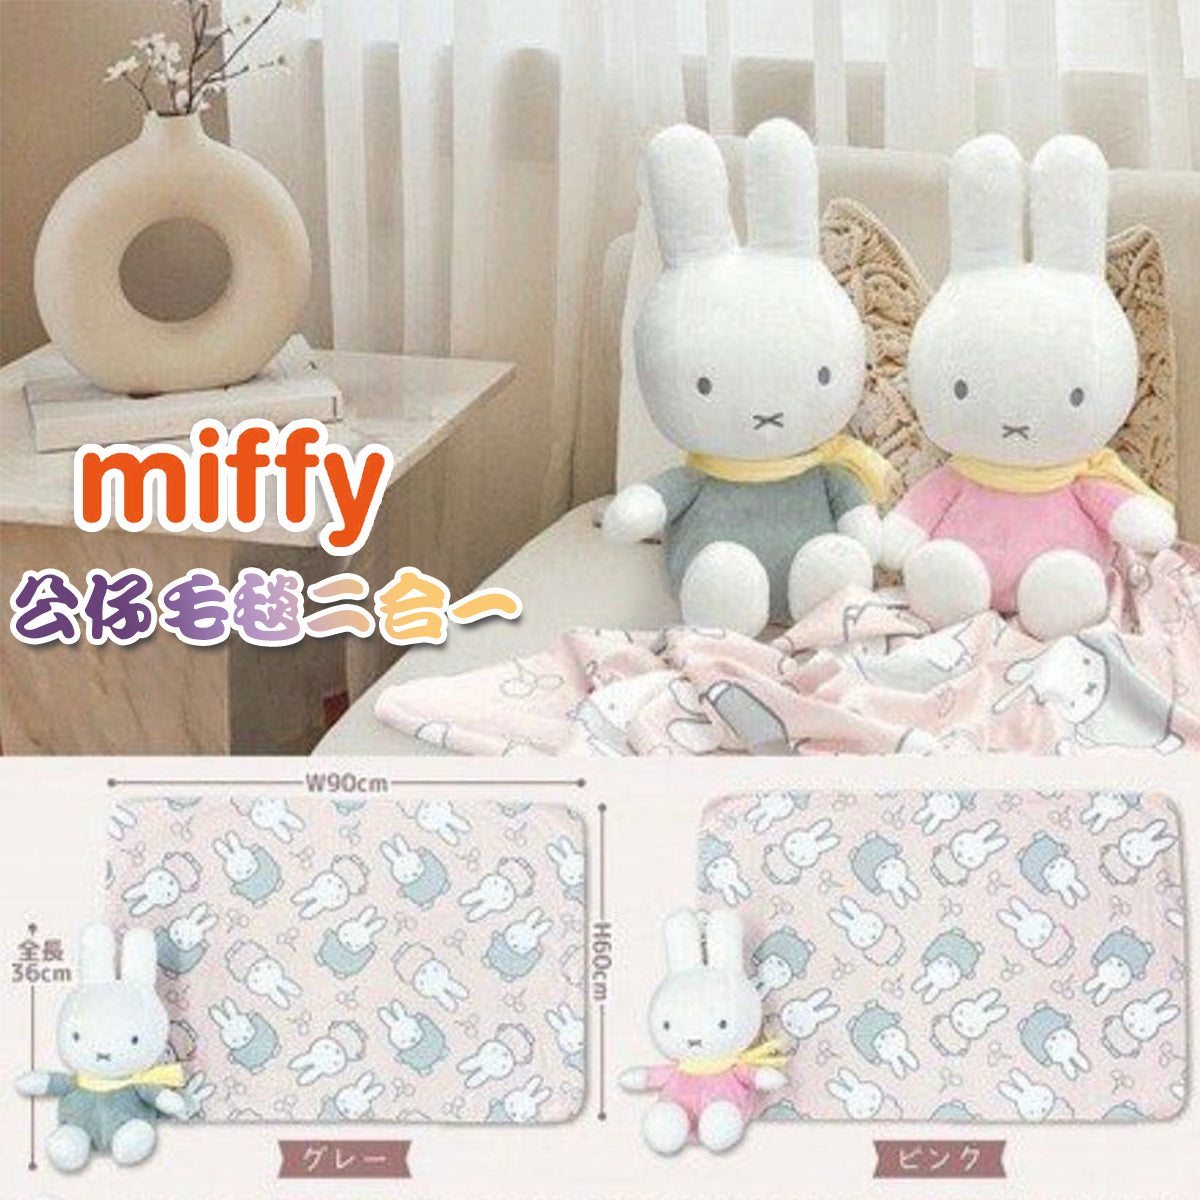 Plush Miffy with Scarf Blanket (Japan Edition)